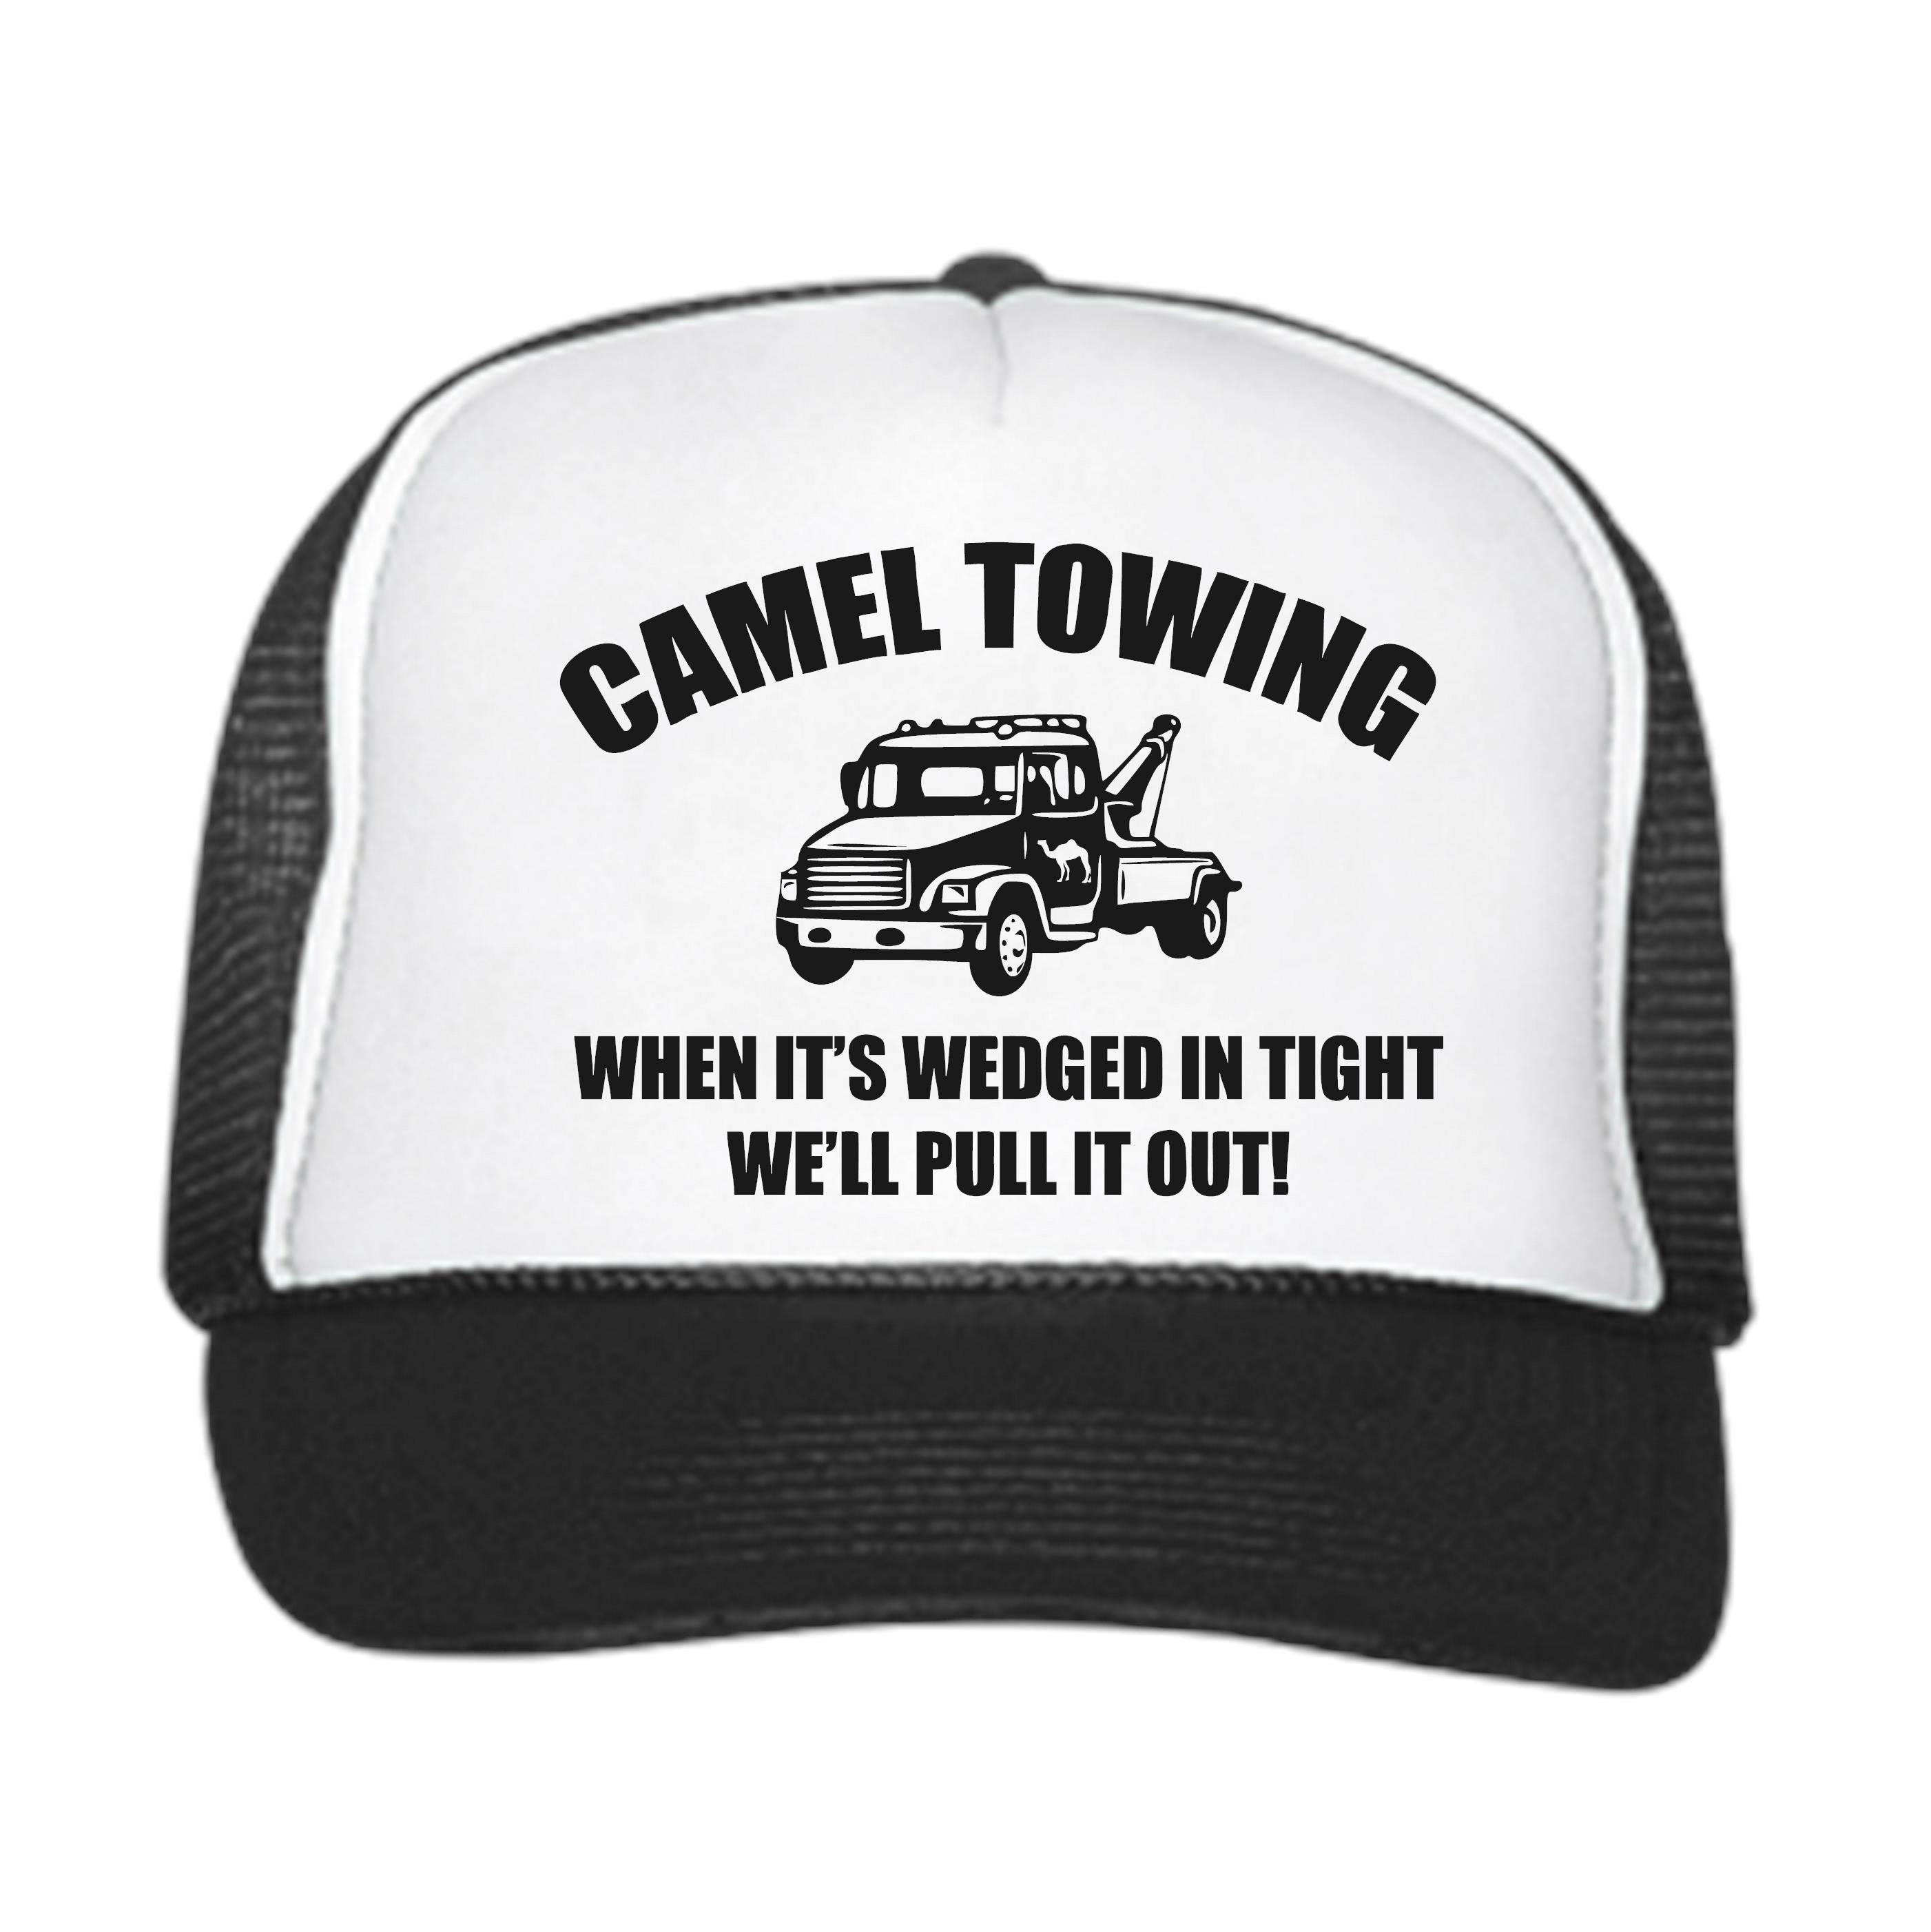 Camel Towing Funny Trucker Hat // Unbeatable Quality and Price // Humor //  Snapback // Retro // 